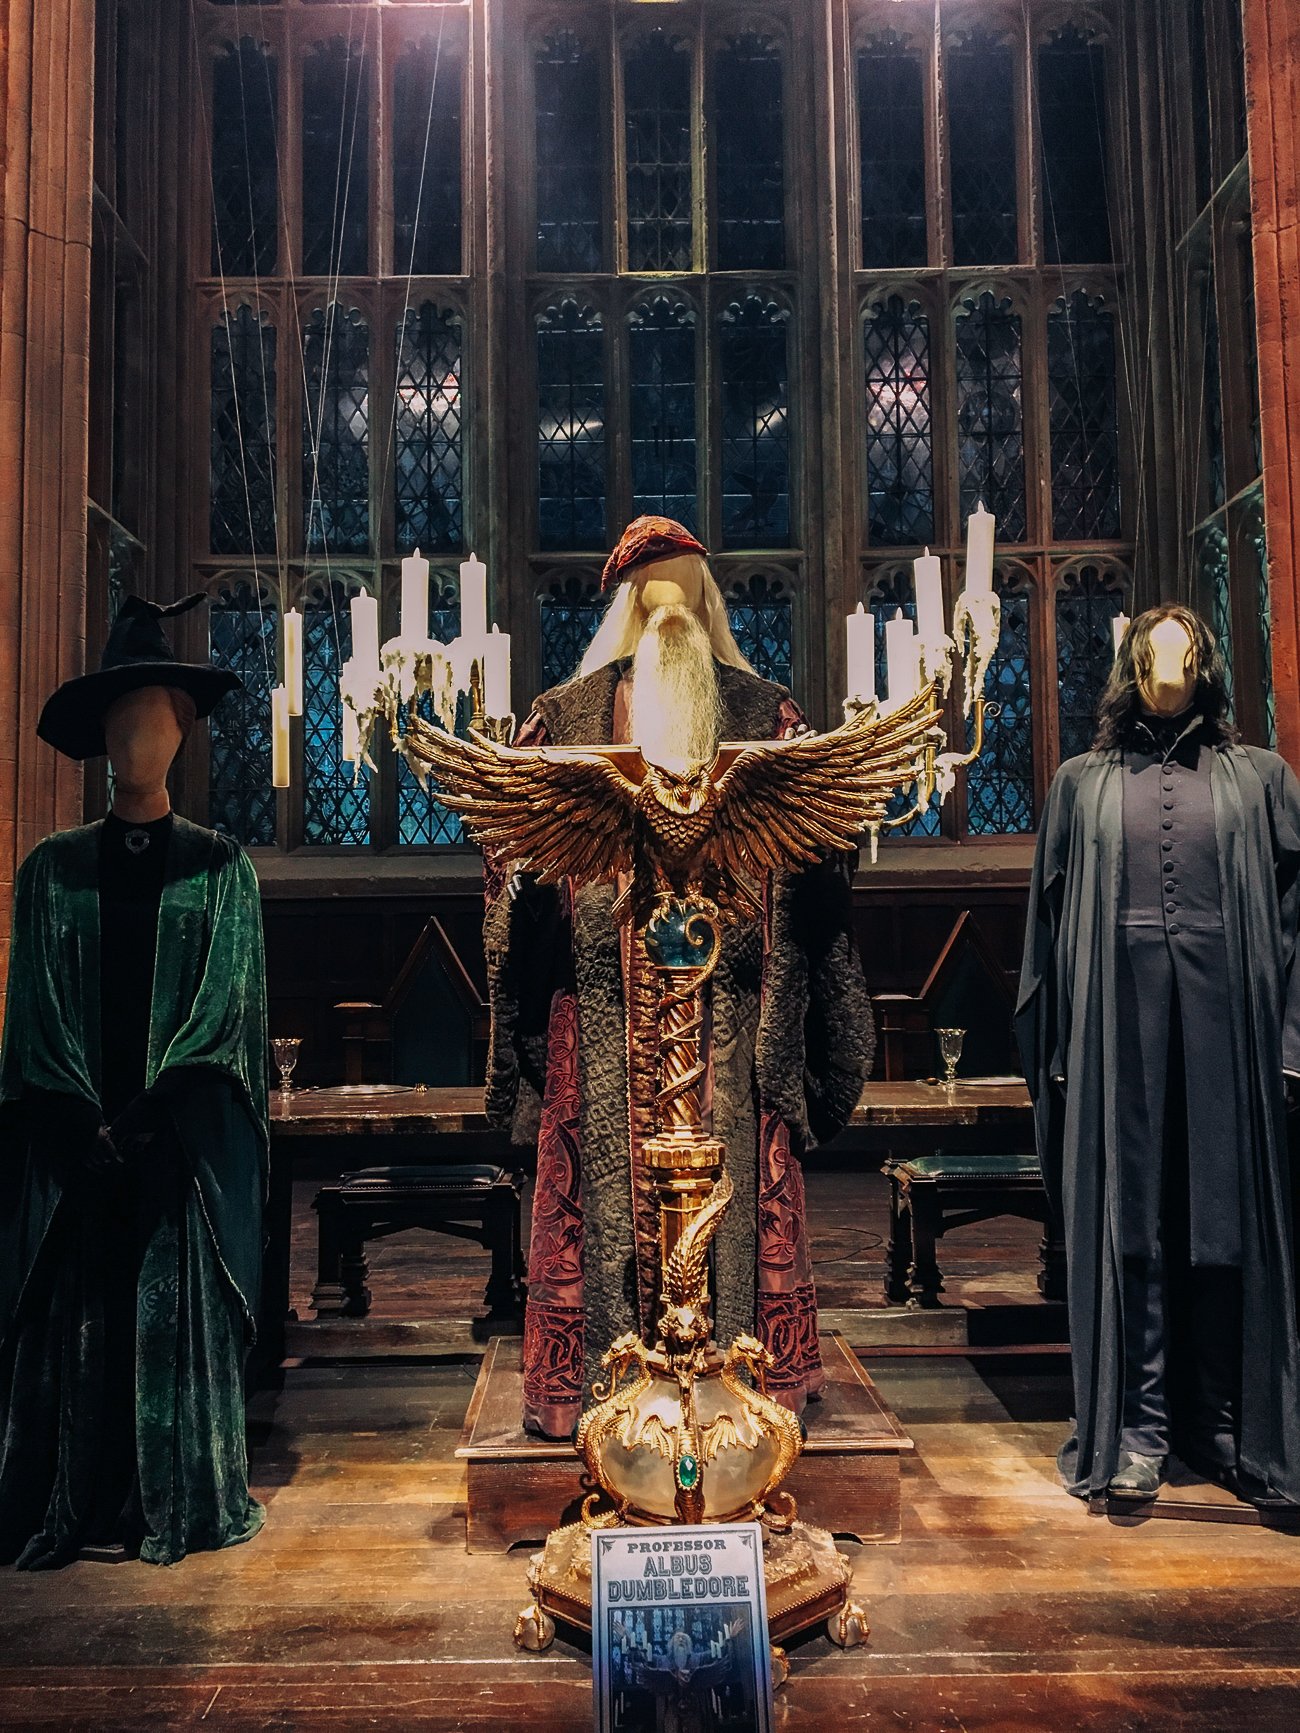 Dumbledore, McGonagall and Snape at the dais in the Great Hall at Harry Potter Studio Tour